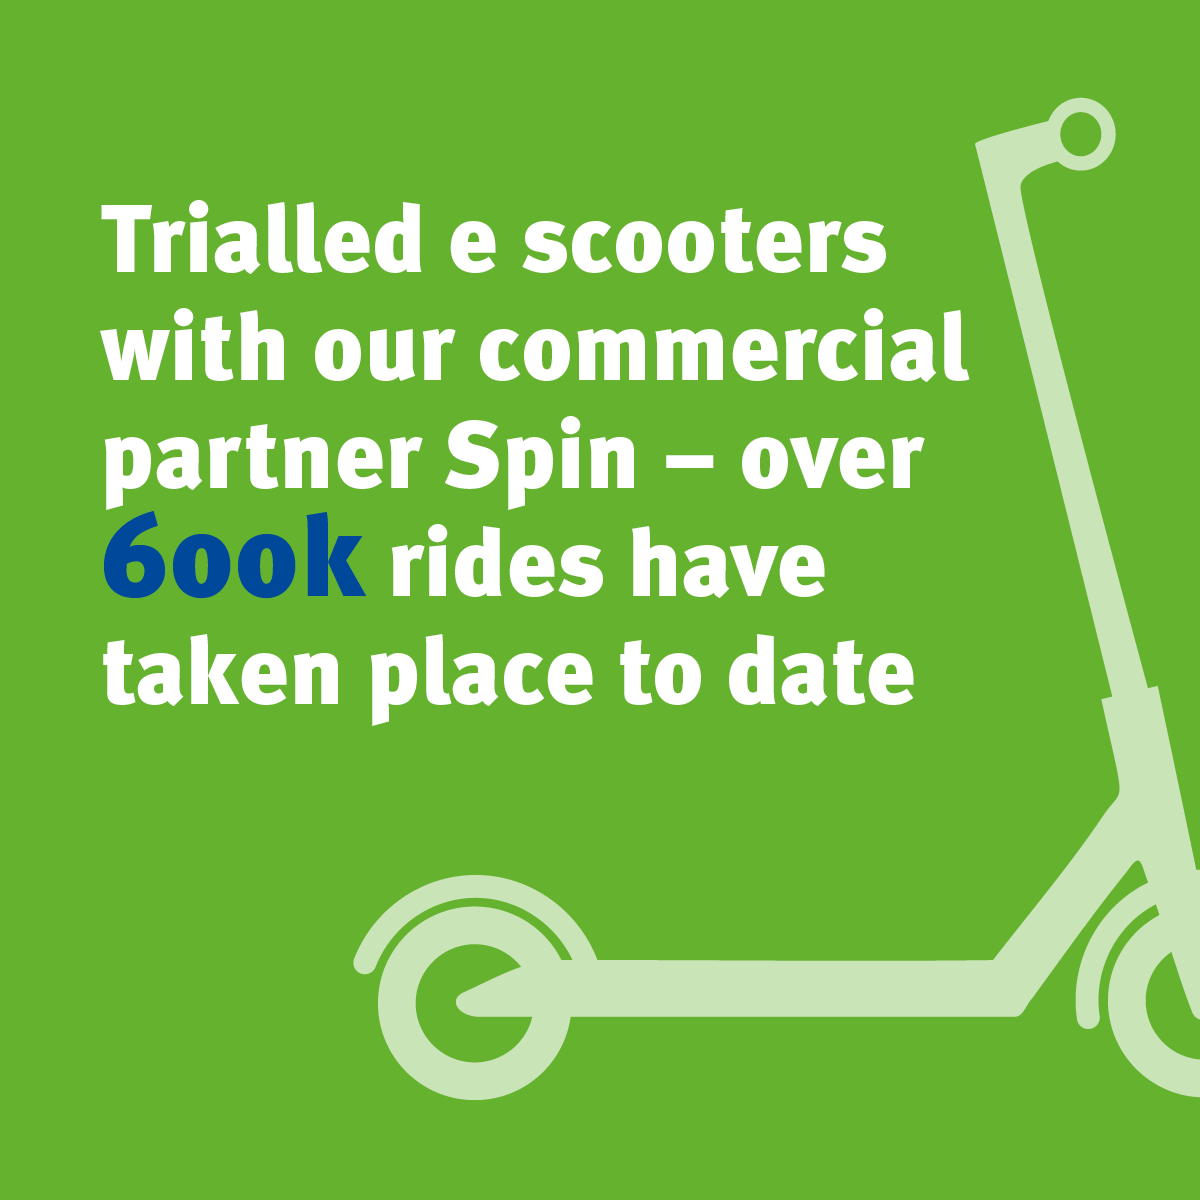 Trialled e-scooters with our commercial partner Spin - over 600k rides have taken place to date